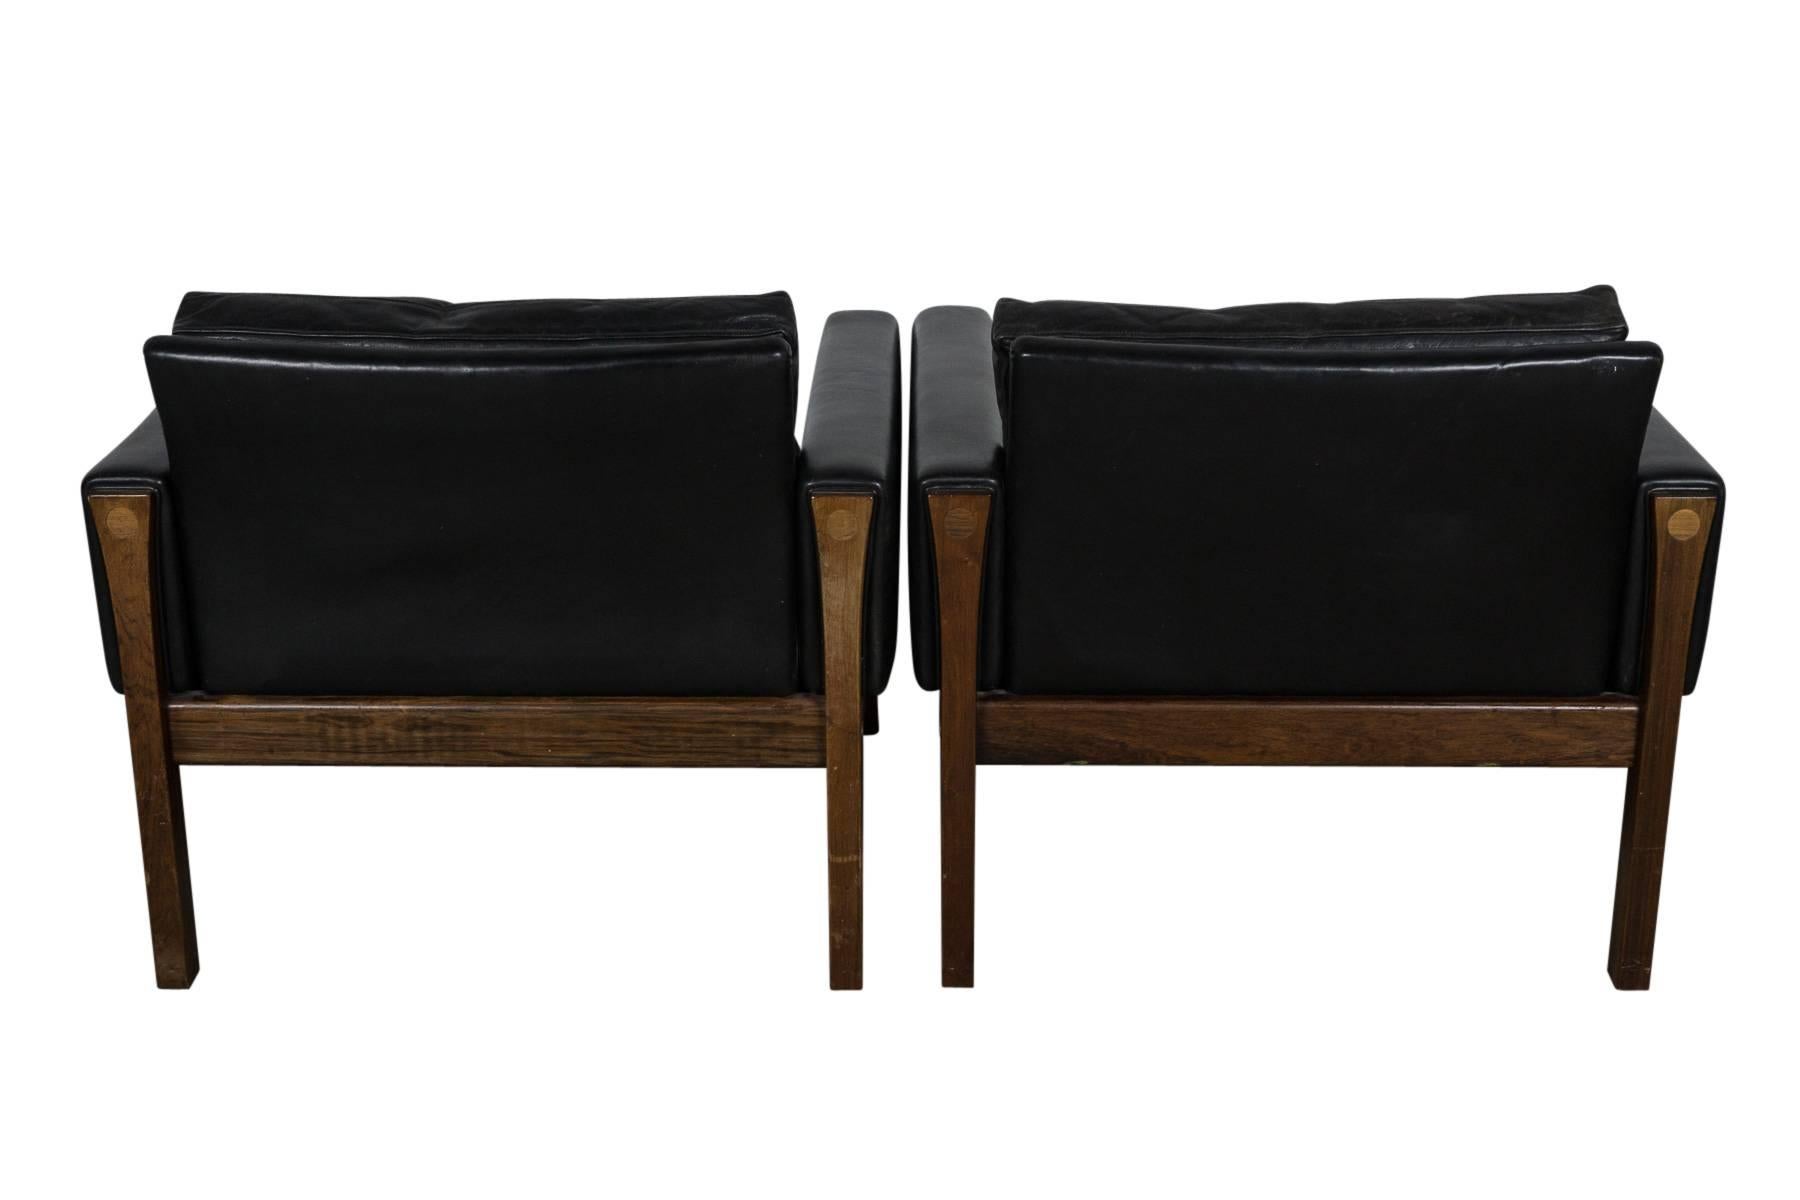 Rare pair of elegant rosewood and black leather chairs designed by Hans Wegner. Original, supple leather. Designed in 1962 for AP Stolen, Denmark.